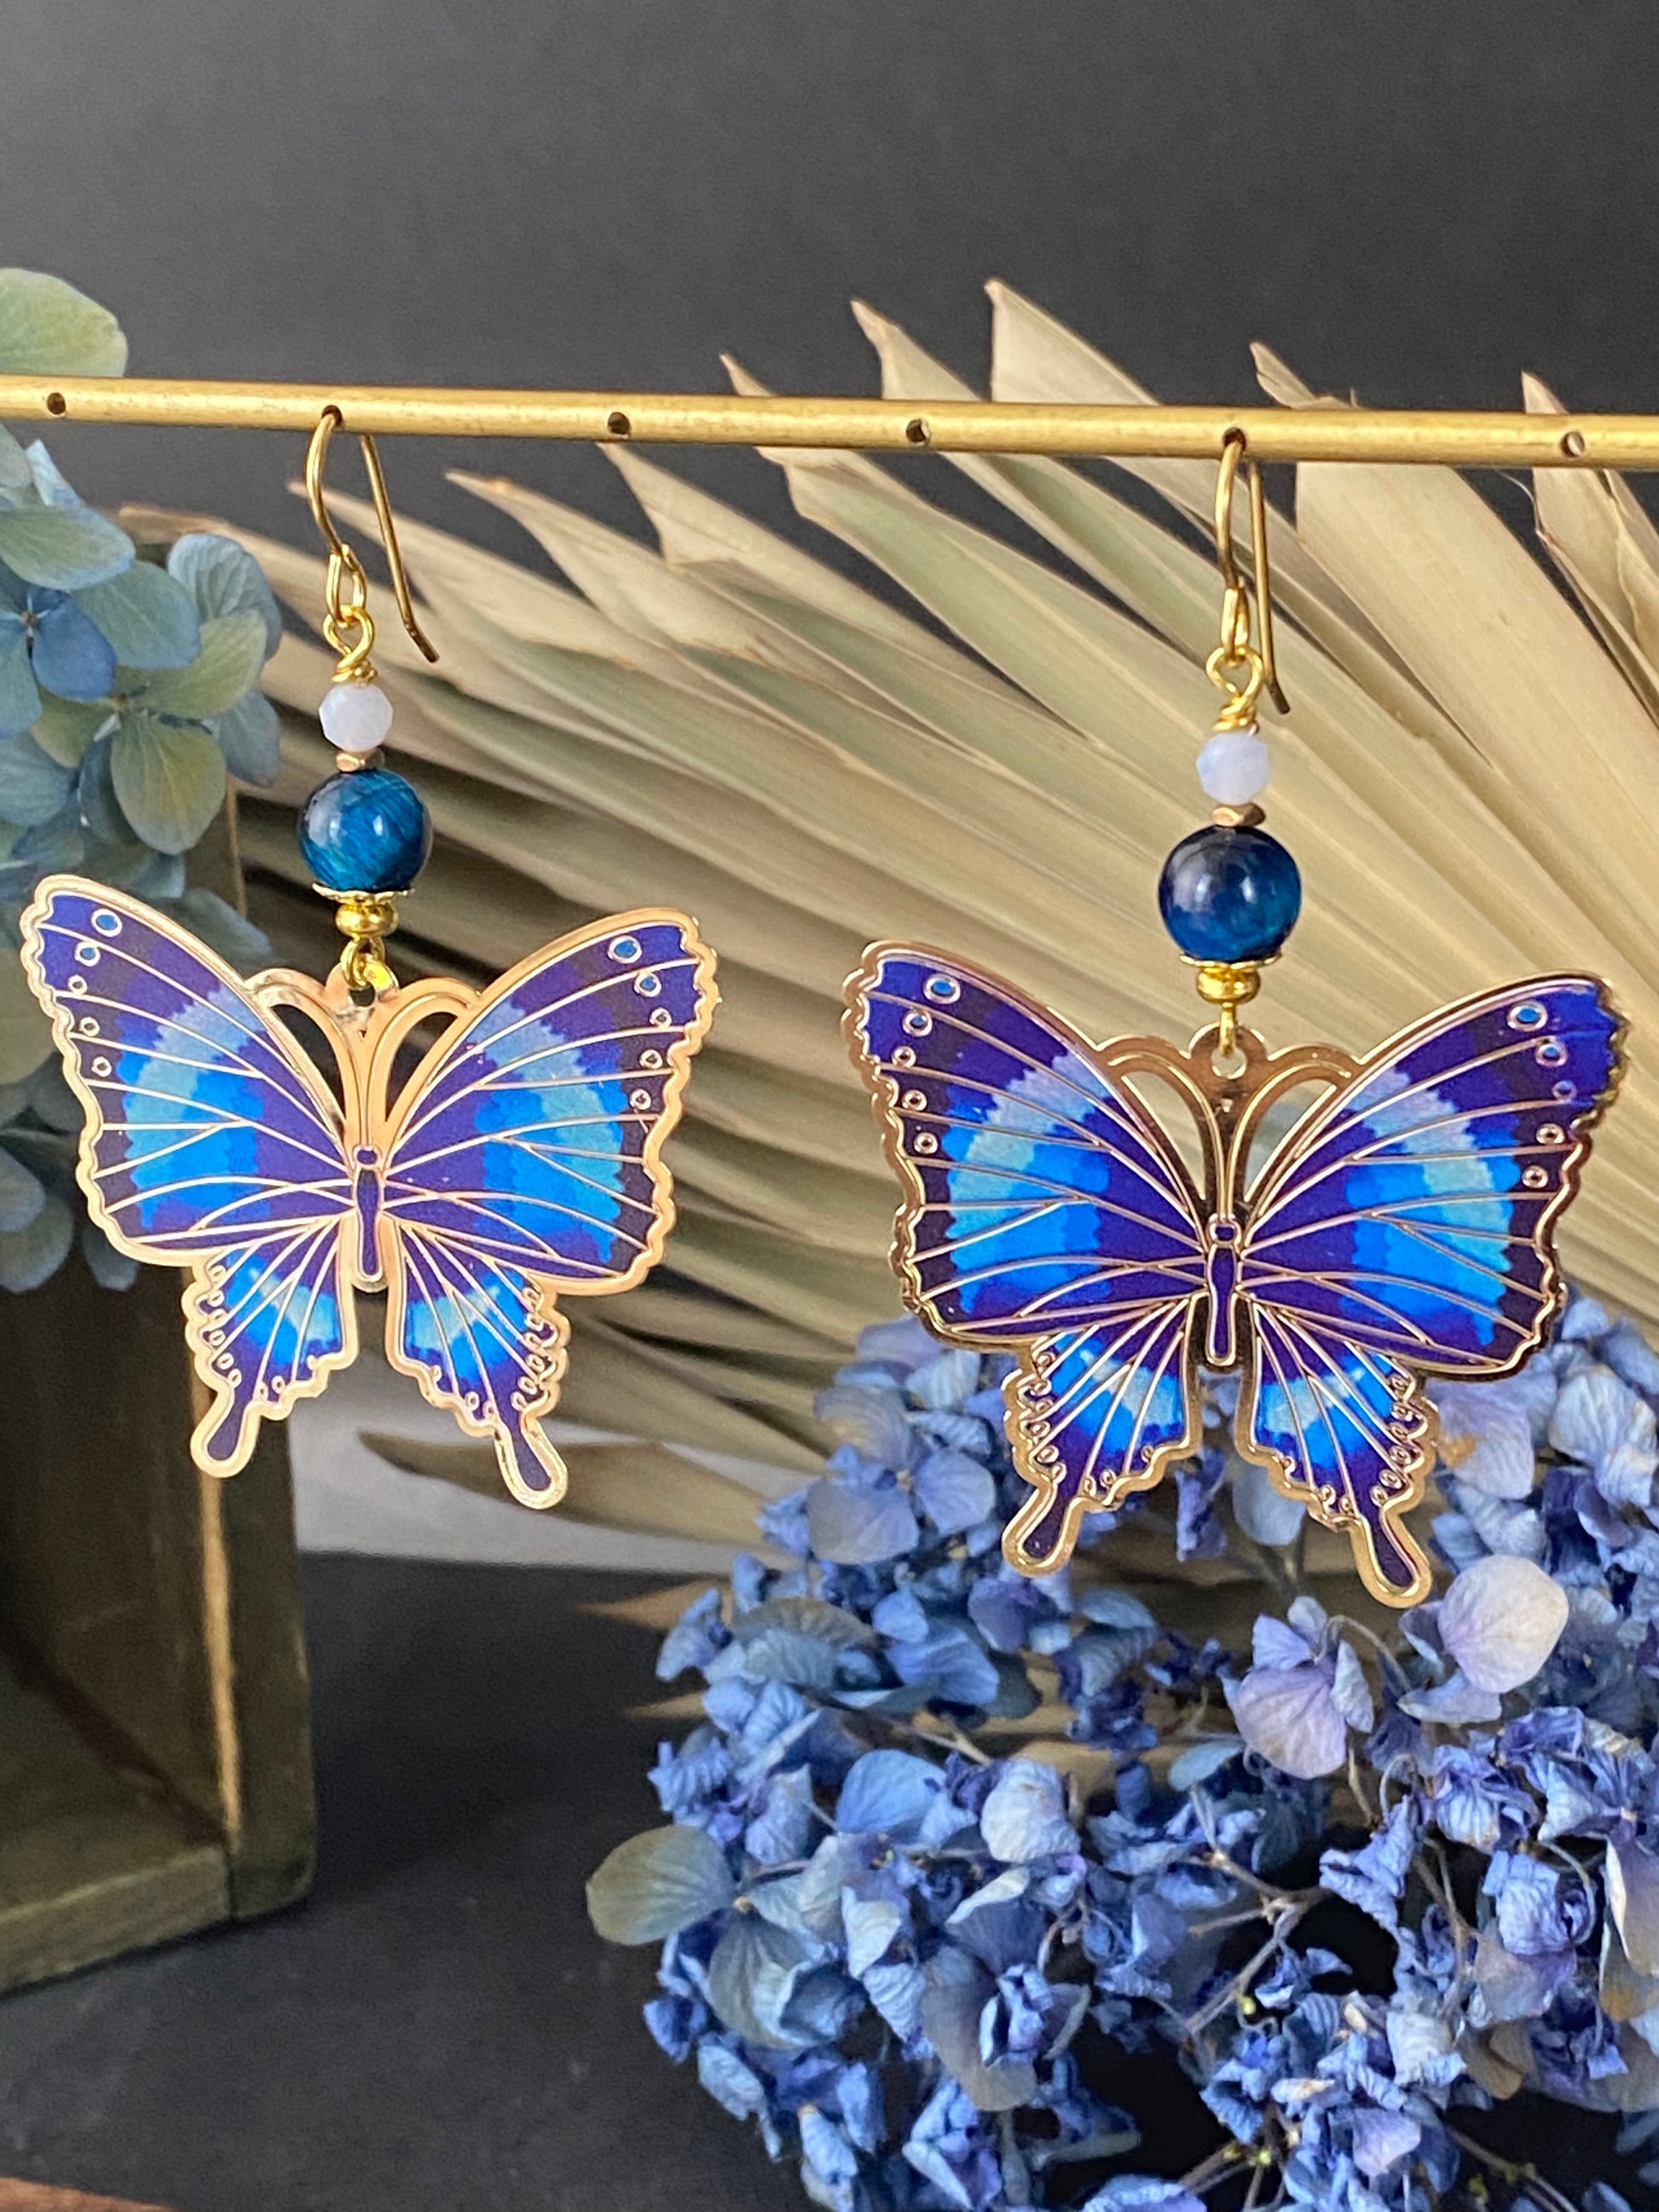 Blue tigers eye, blue butterfly charms, gold metal earrings. - Andria Bieber Designs 